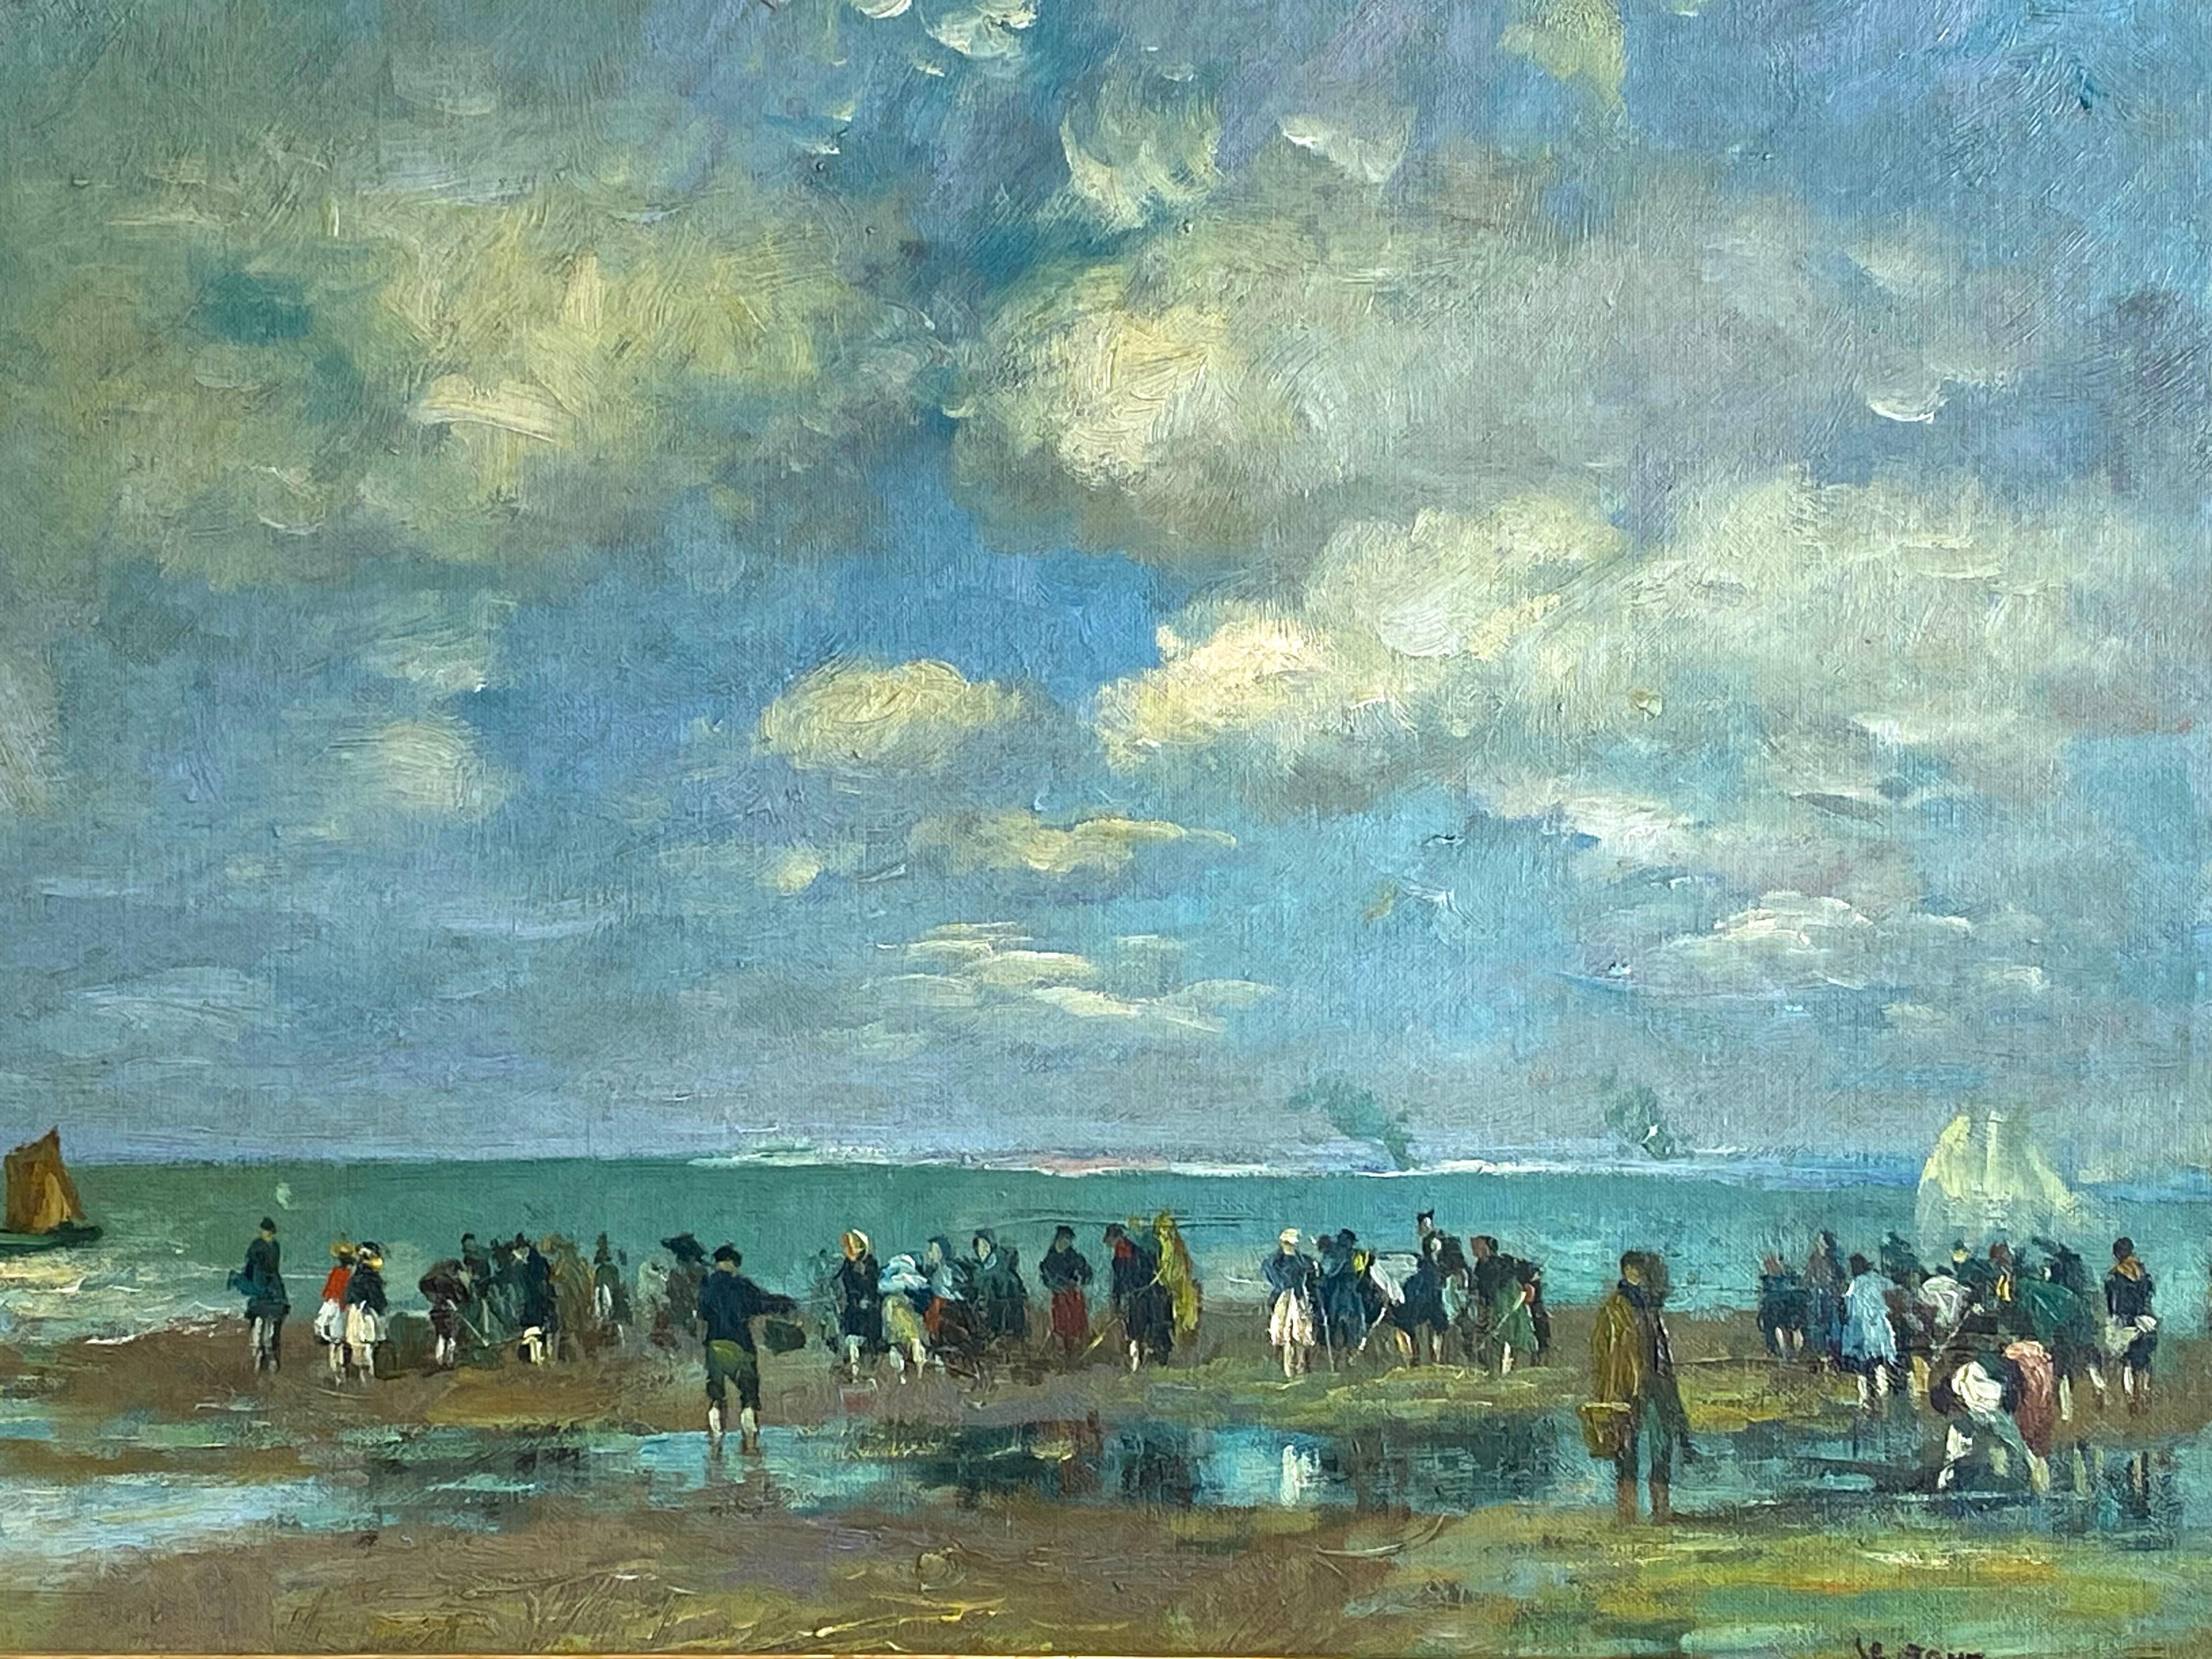 Here for your consideration is a large early 20th century painting a a large varied group of figures looking out to sea on a beach. Oil on wooden panel; circa 1930. Signed “Le Saux” lower right. Condition is excellent. The painting is housed in an